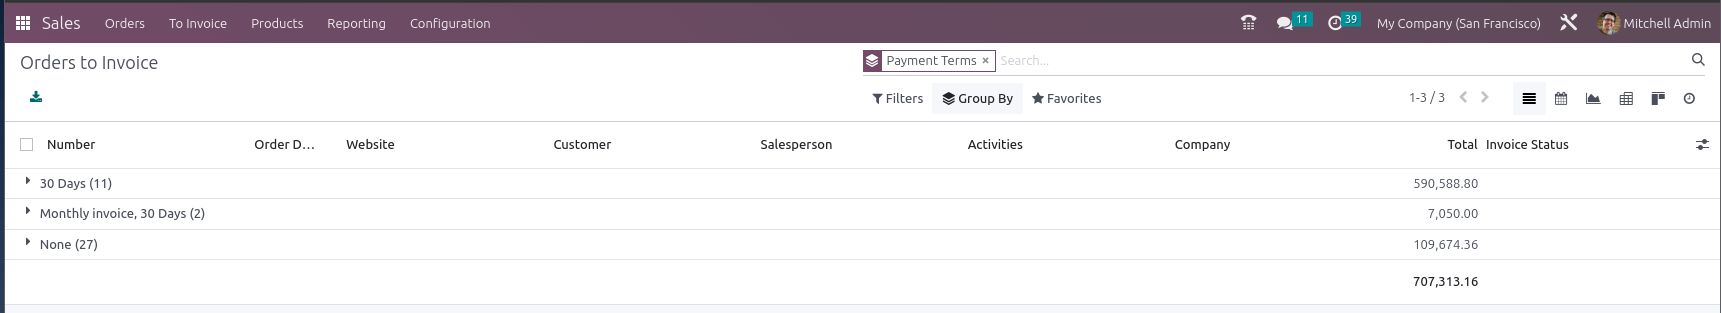 Group by Payment Terms